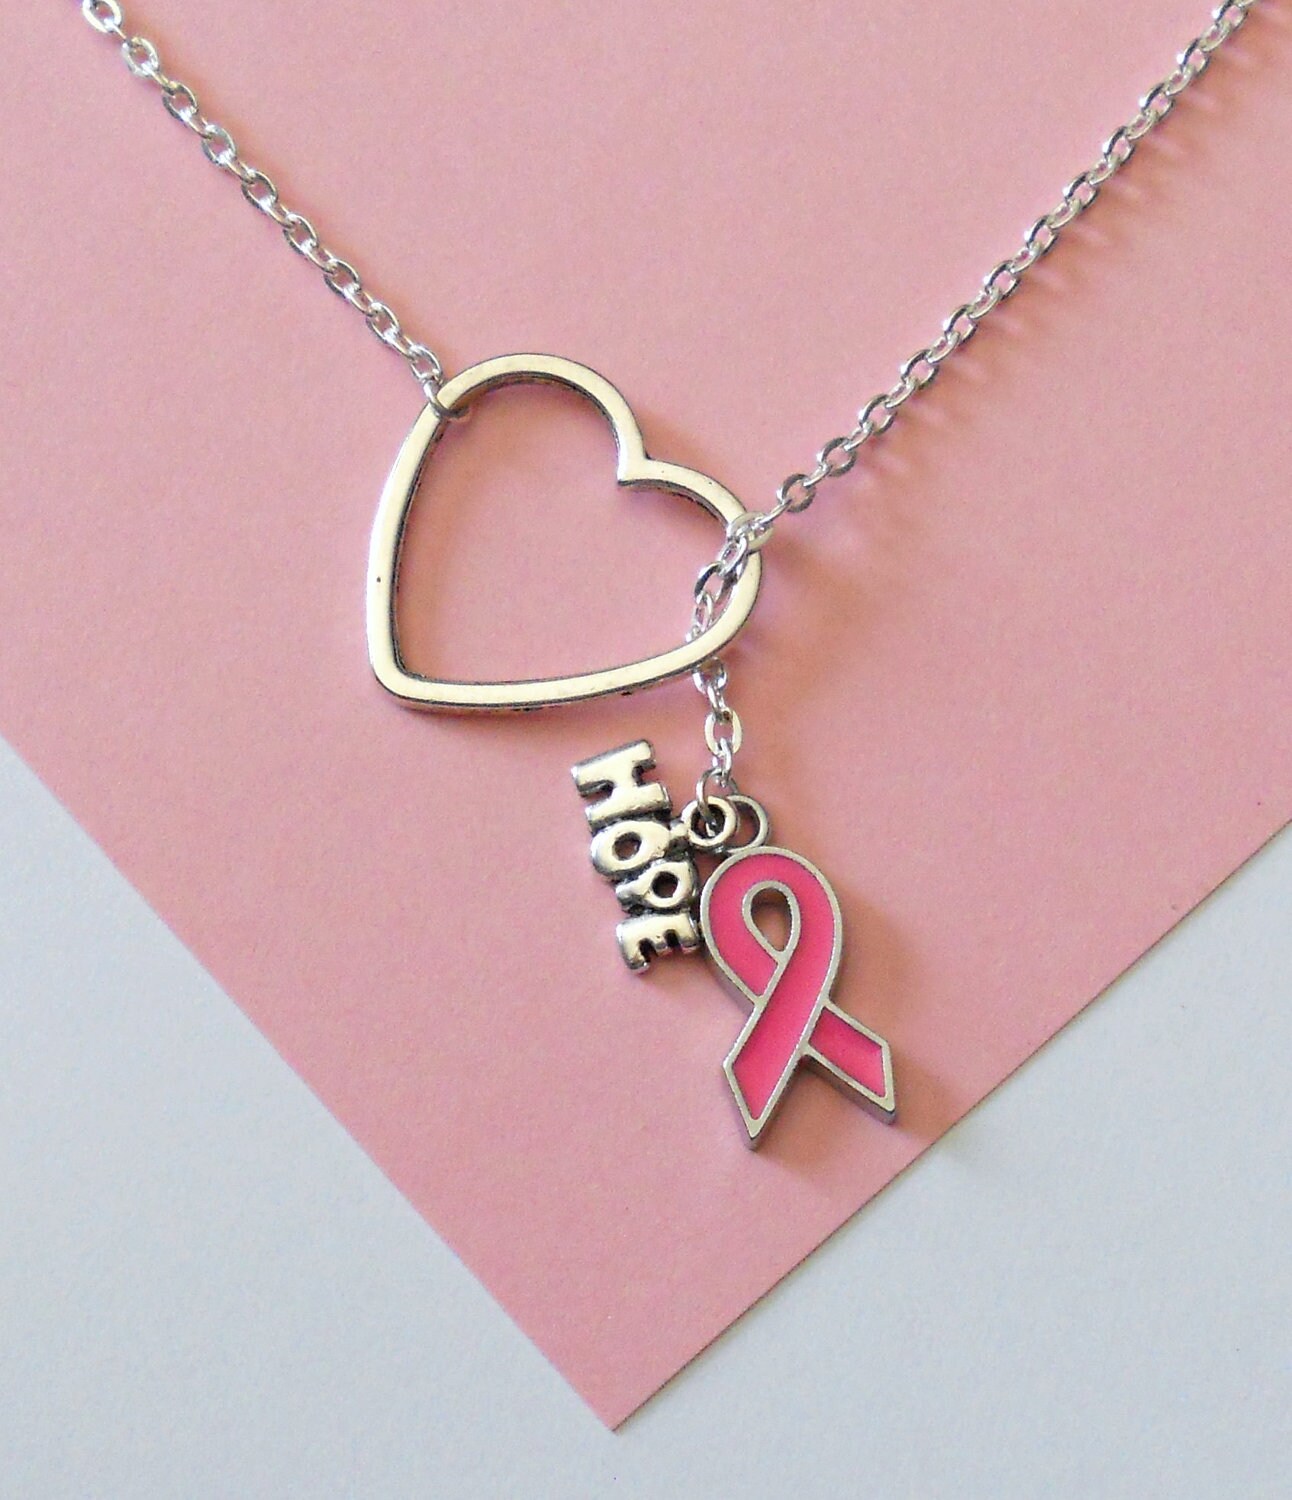 Silver Cancer Awareness Necklace with ribbon, heart and 'hope